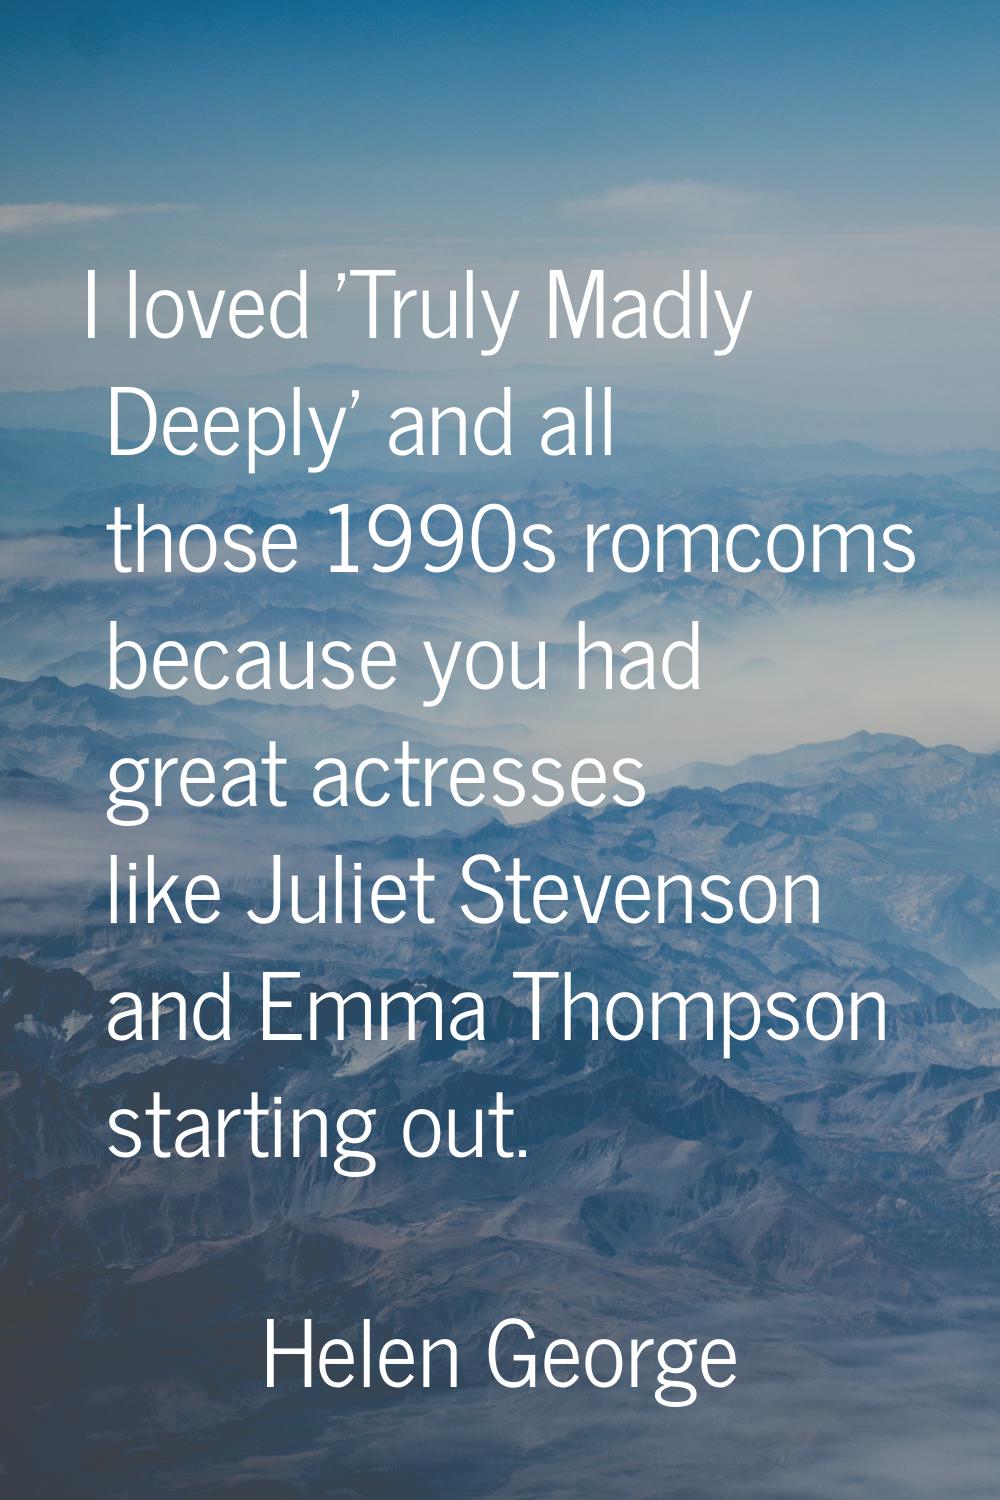 I loved 'Truly Madly Deeply' and all those 1990s romcoms because you had great actresses like Julie